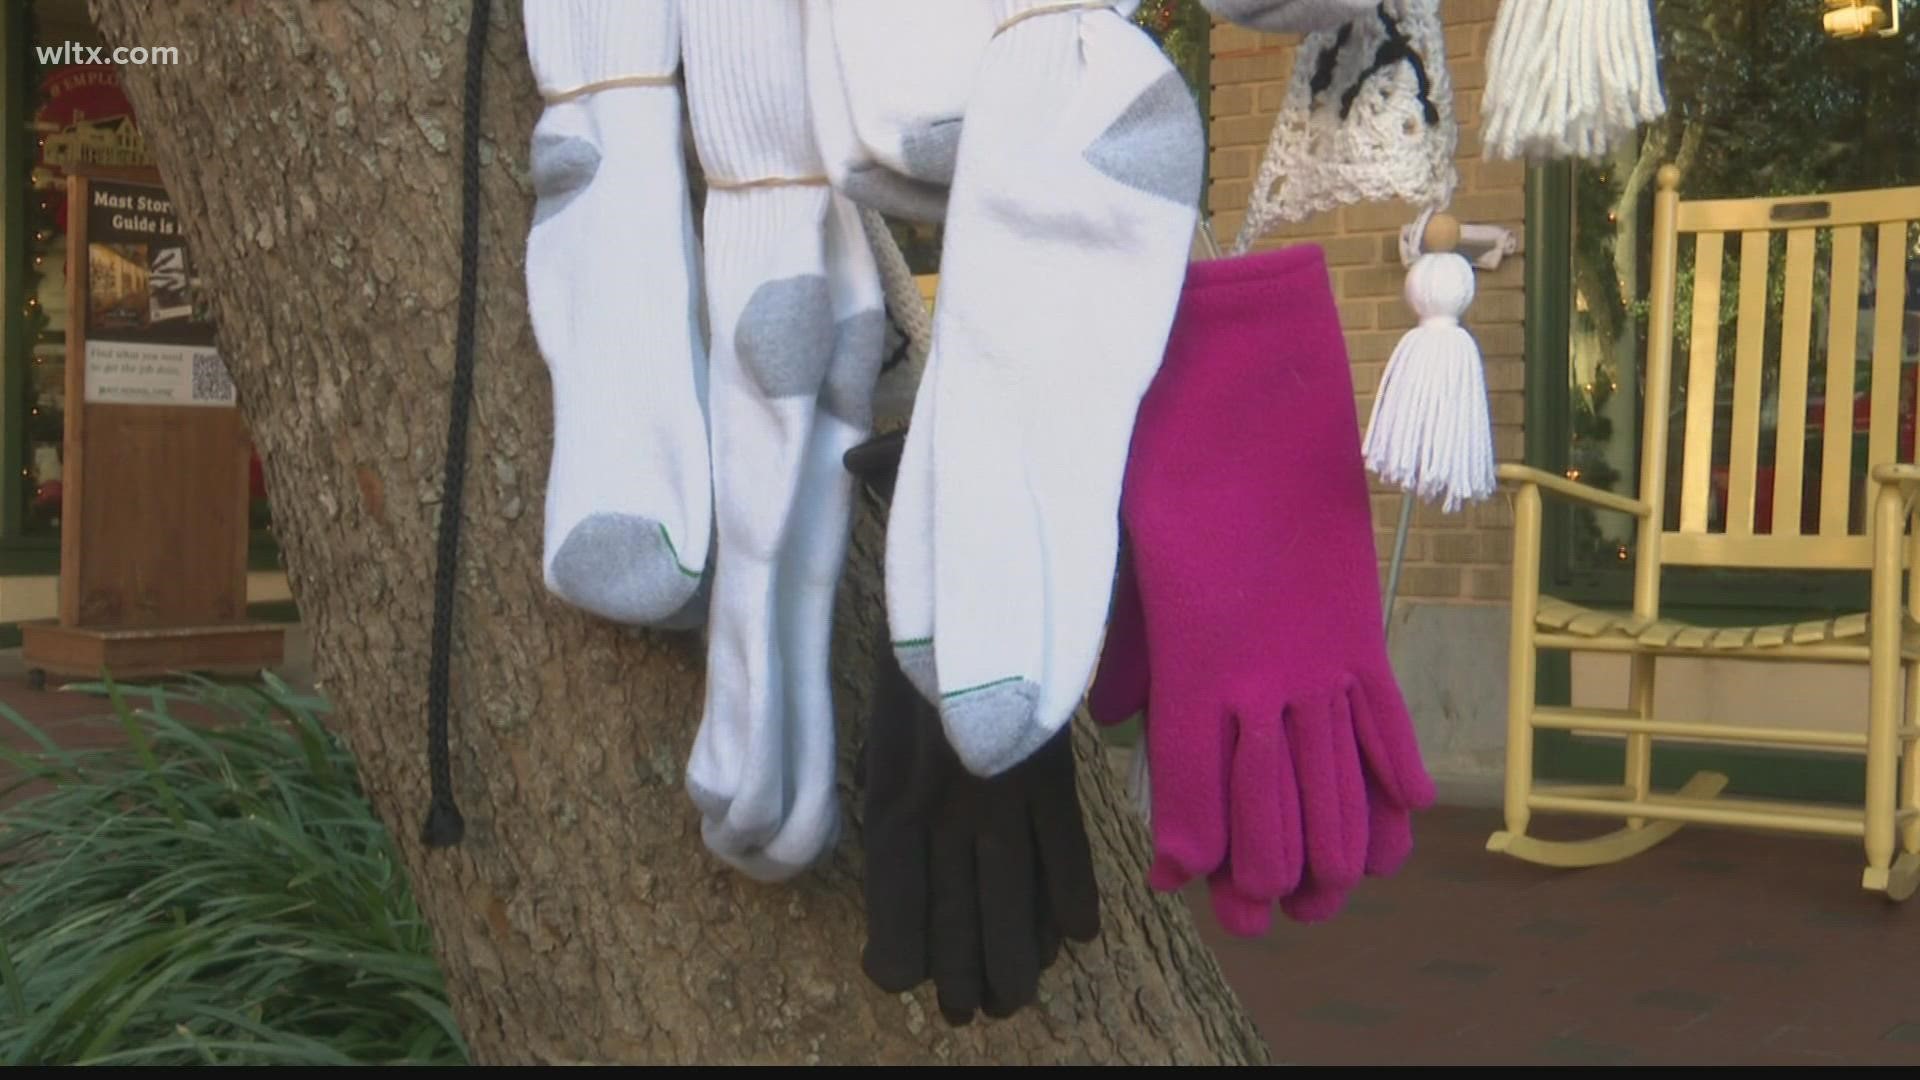 'Yarn Bombers' of Columbia created the "giving tree" that they hang various knitted items for those who might be cold.